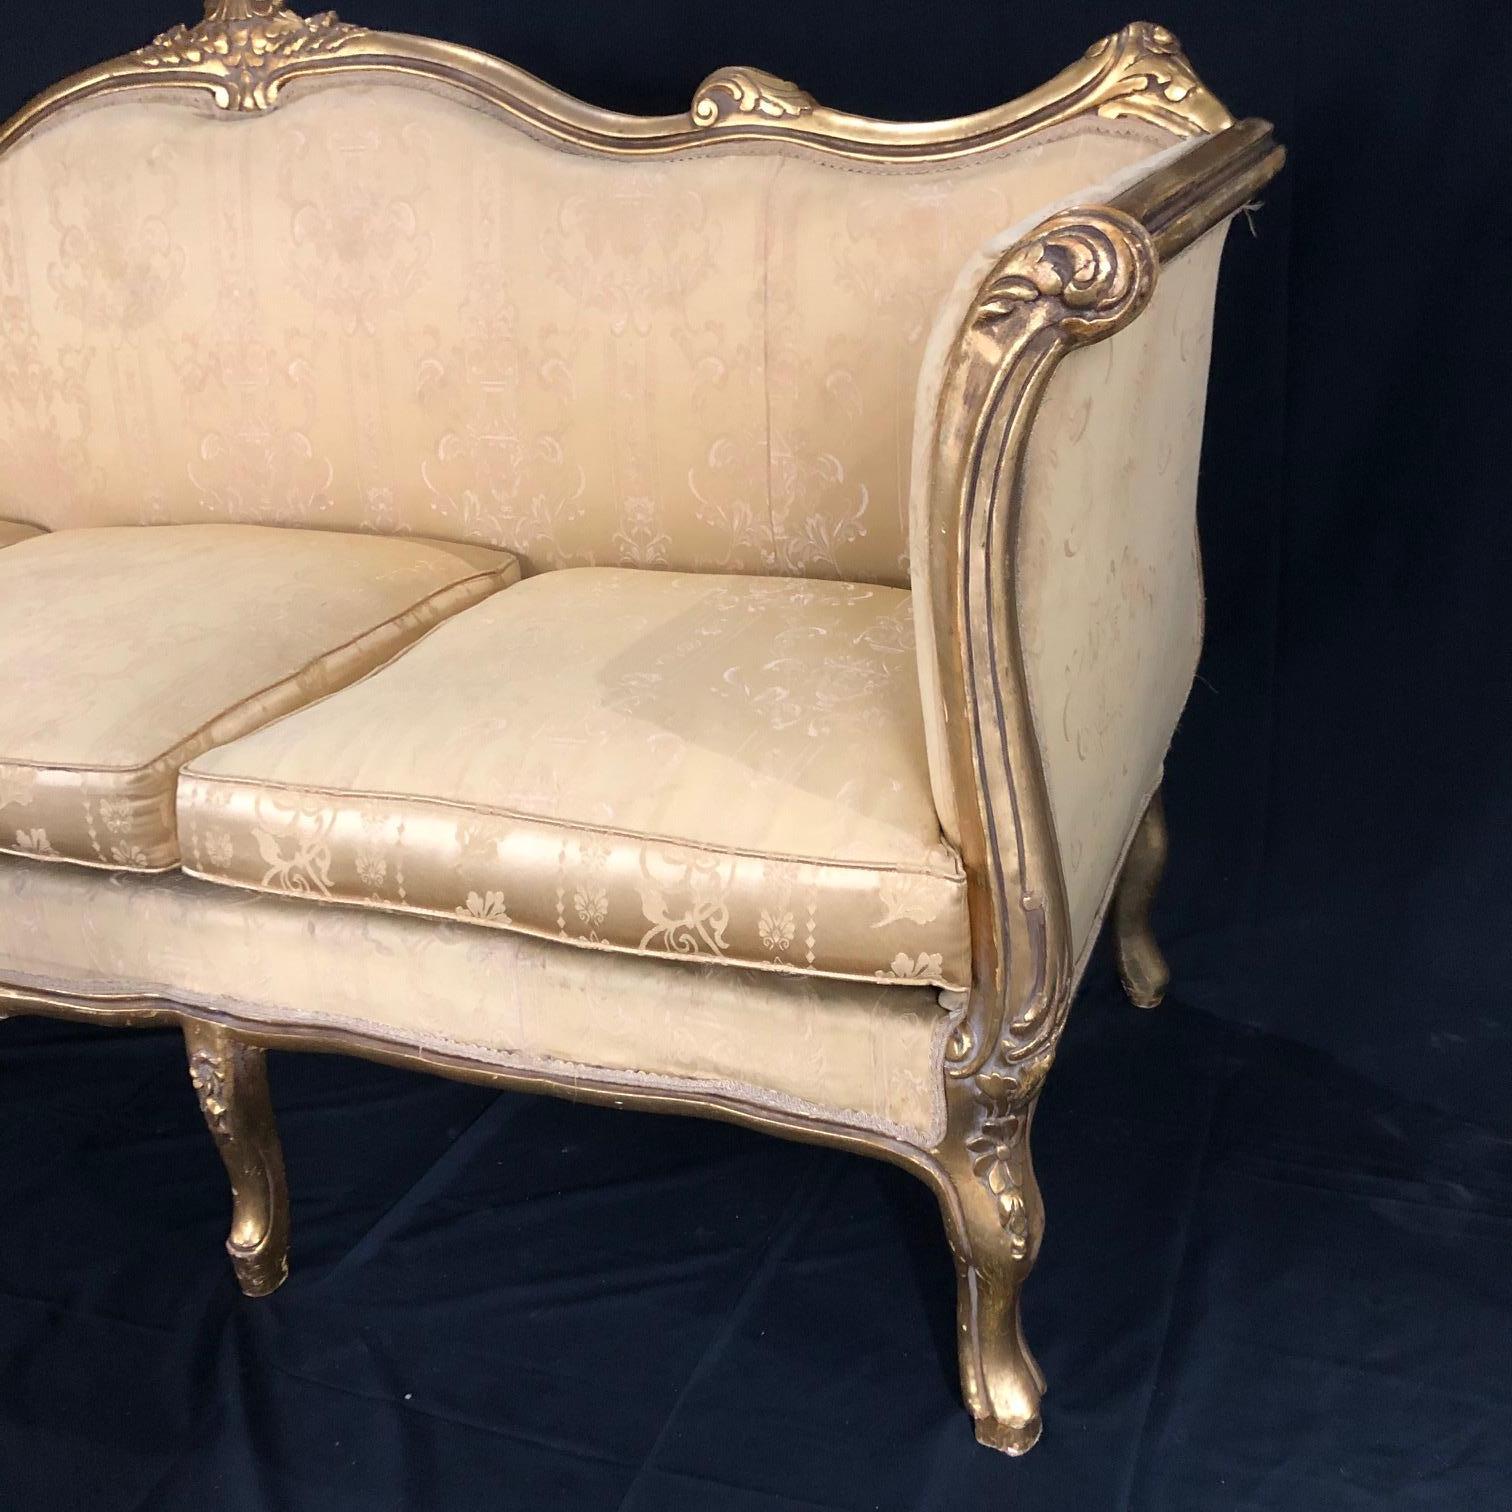 French Louis XV sofa having richly carved and gilded wood and original gold silk blend upholstery in very good condition (see photos). Classic, solid and quite comfortable. Very glamorous. #5148
Measures: Arm height 36
Seat height 21.